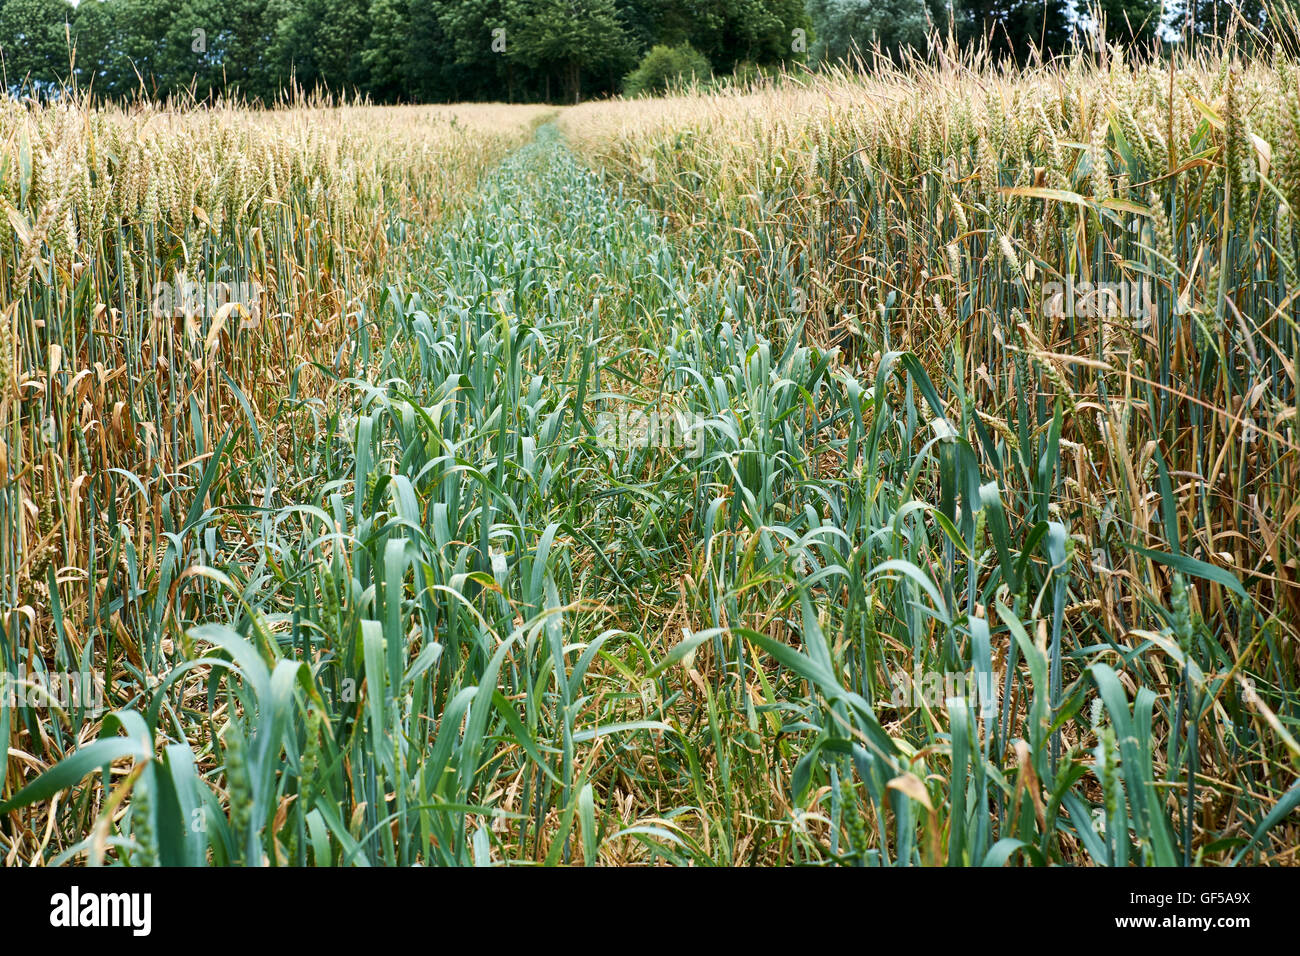 Crop of wheat infested with the Black Grass (Alopecurus myosuroides) weed, England, UK Stock Photo